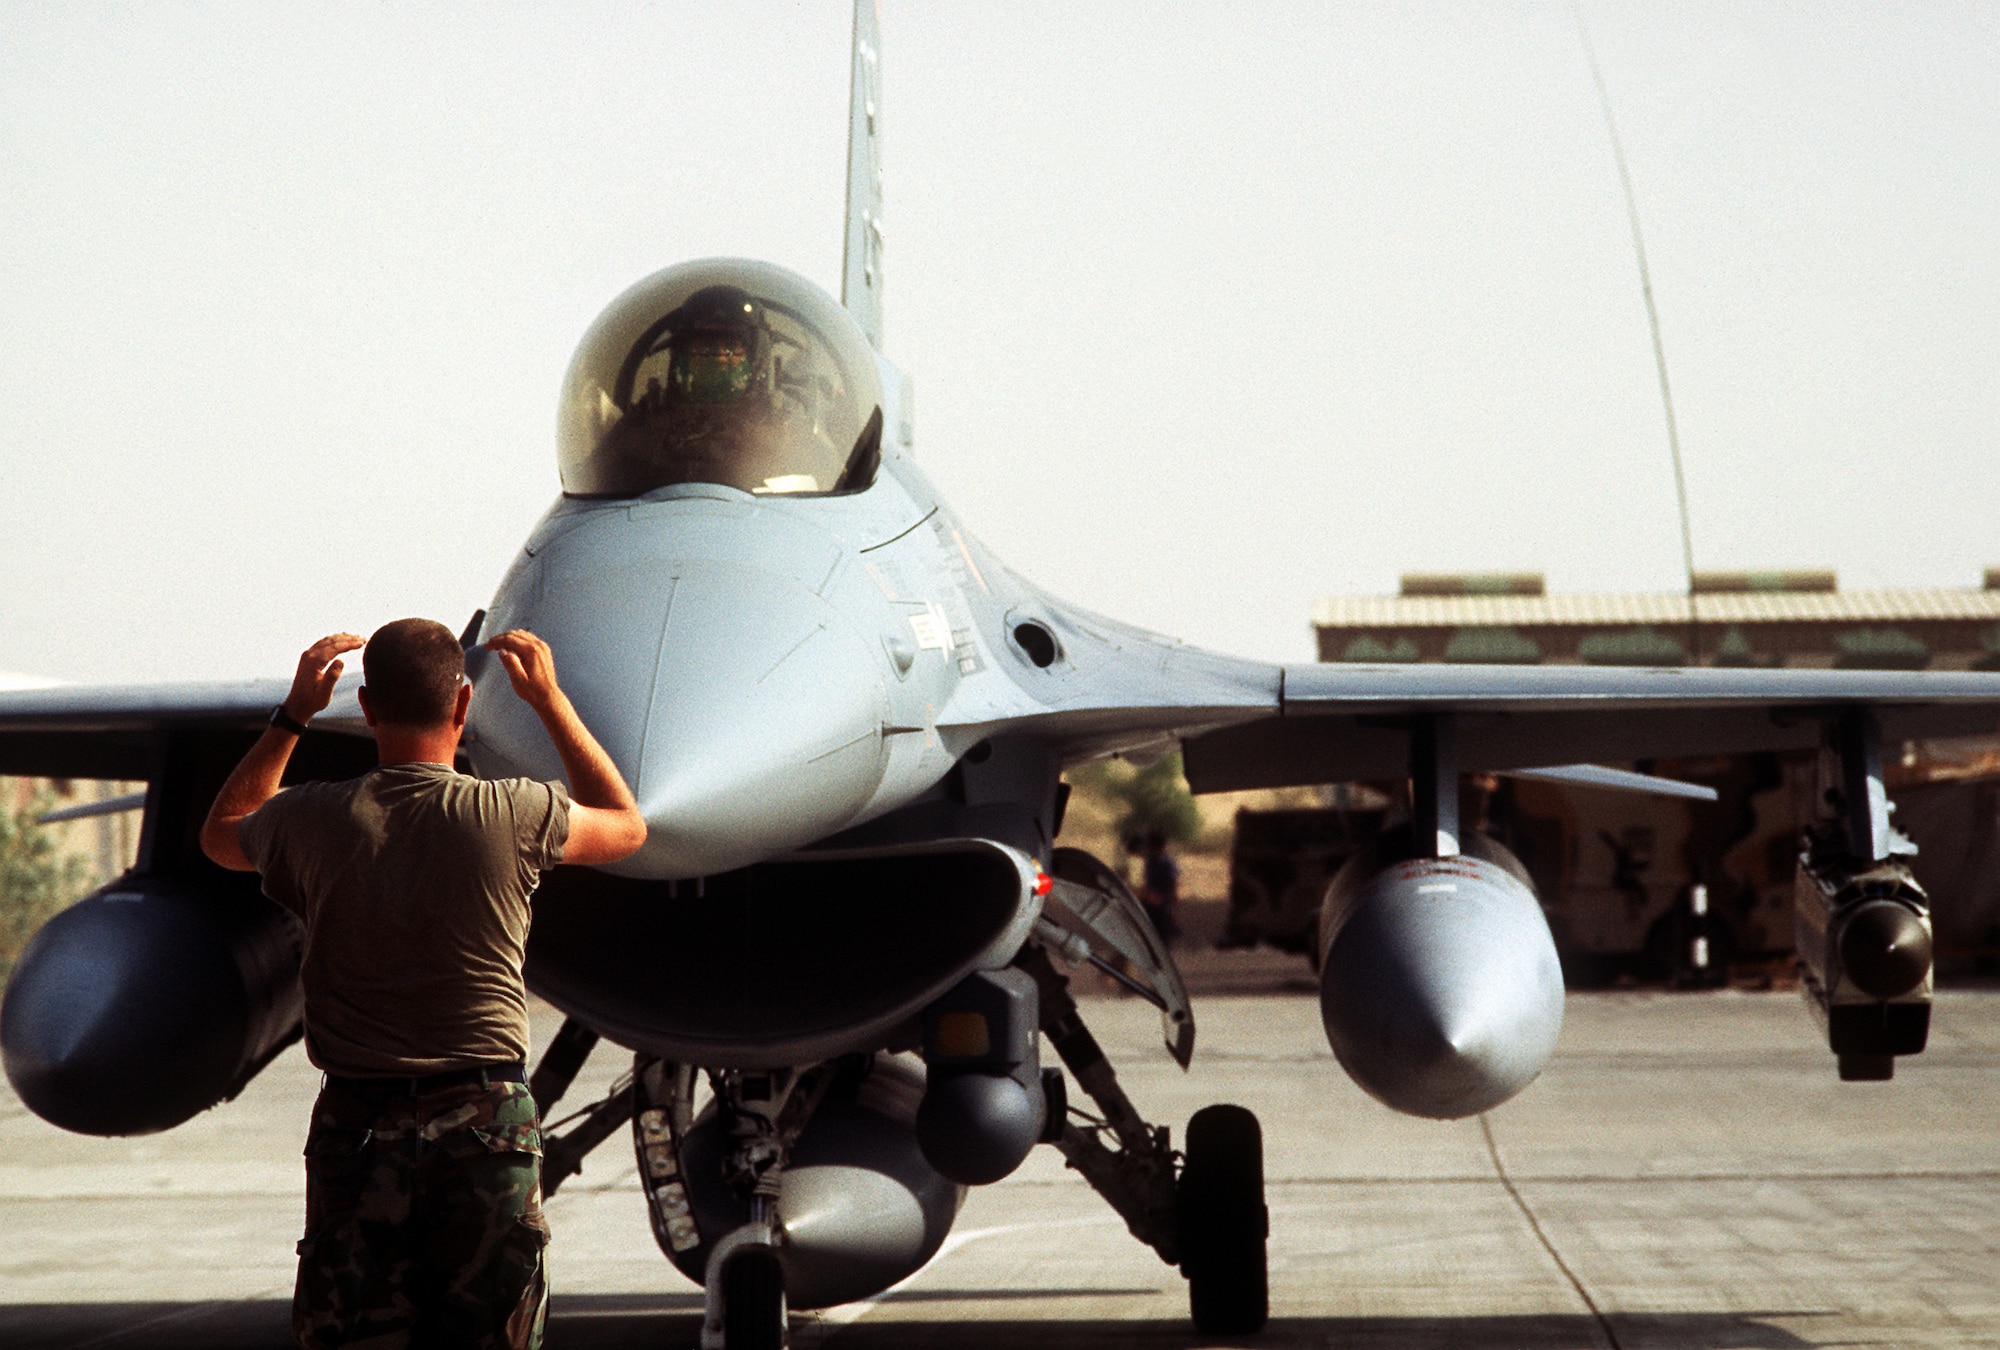 1990's -- A ground crewman guides a 388th Tactical Fighter Wing F-16C Fighting Falcon aircraft onto the taxiway.  The 388th TFW is deploying to Saudi Arabia to take part in Operation Desert Shield.  Mounted on the aircraft's left outboard wing pylon is an AN/ALQ-131 Electronic CounterMeasures pod; mounted on the side of the engine intake is a Low Altitude Navigation, Targeting Infrared Night (LANTIRN) navigation pod.  